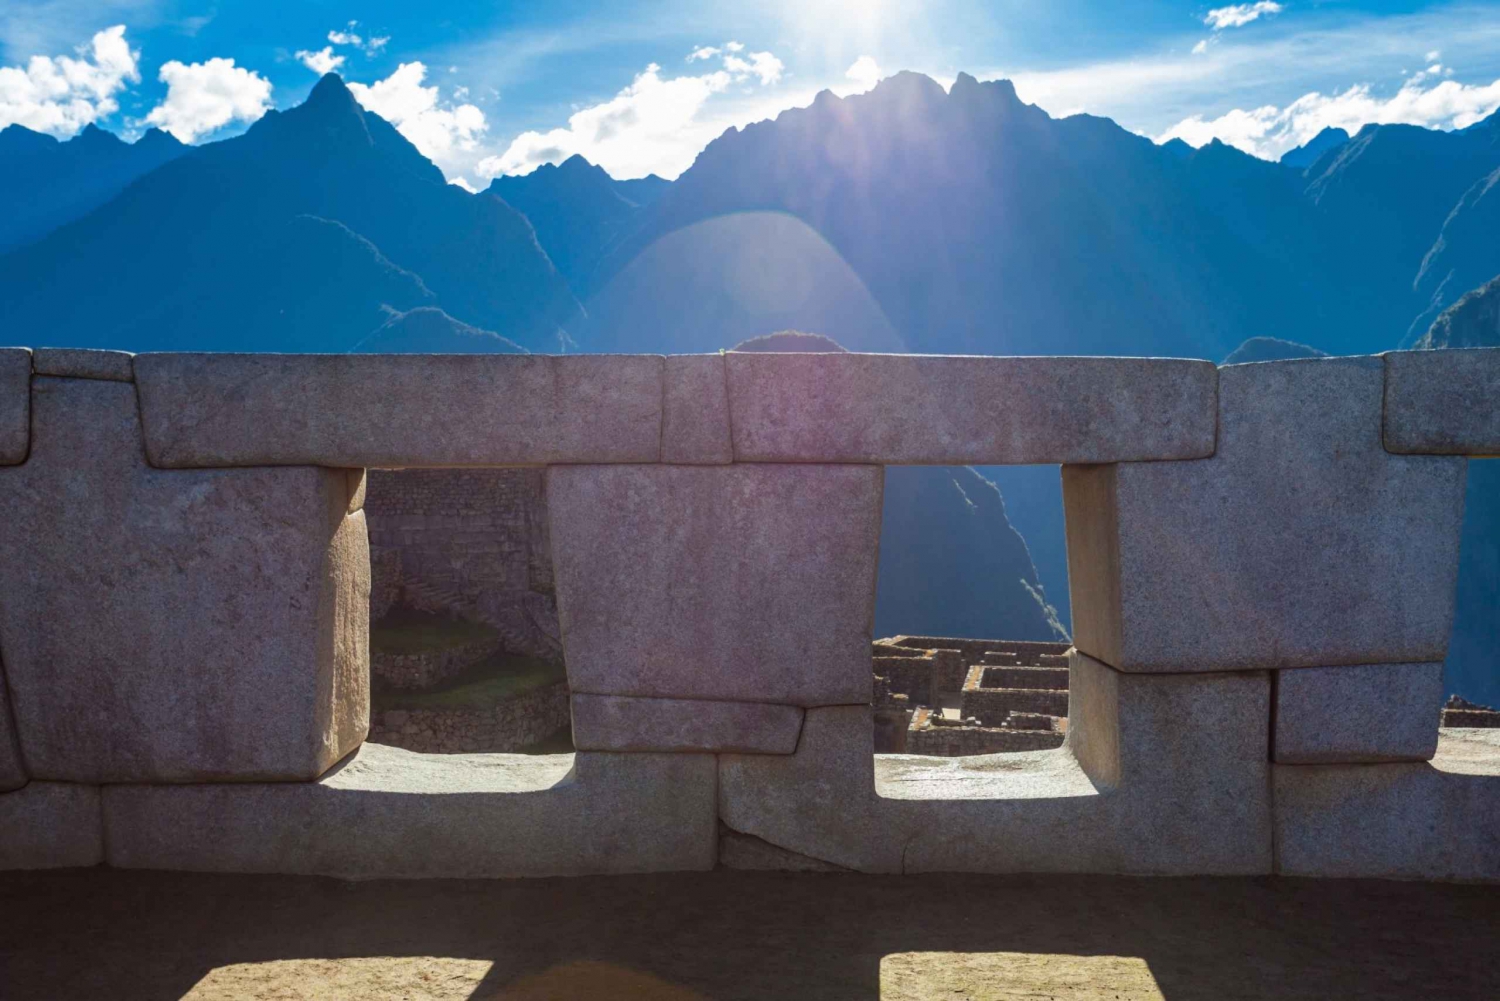 Guided Tour of Machupicchu: Private and Flexible 3 hours